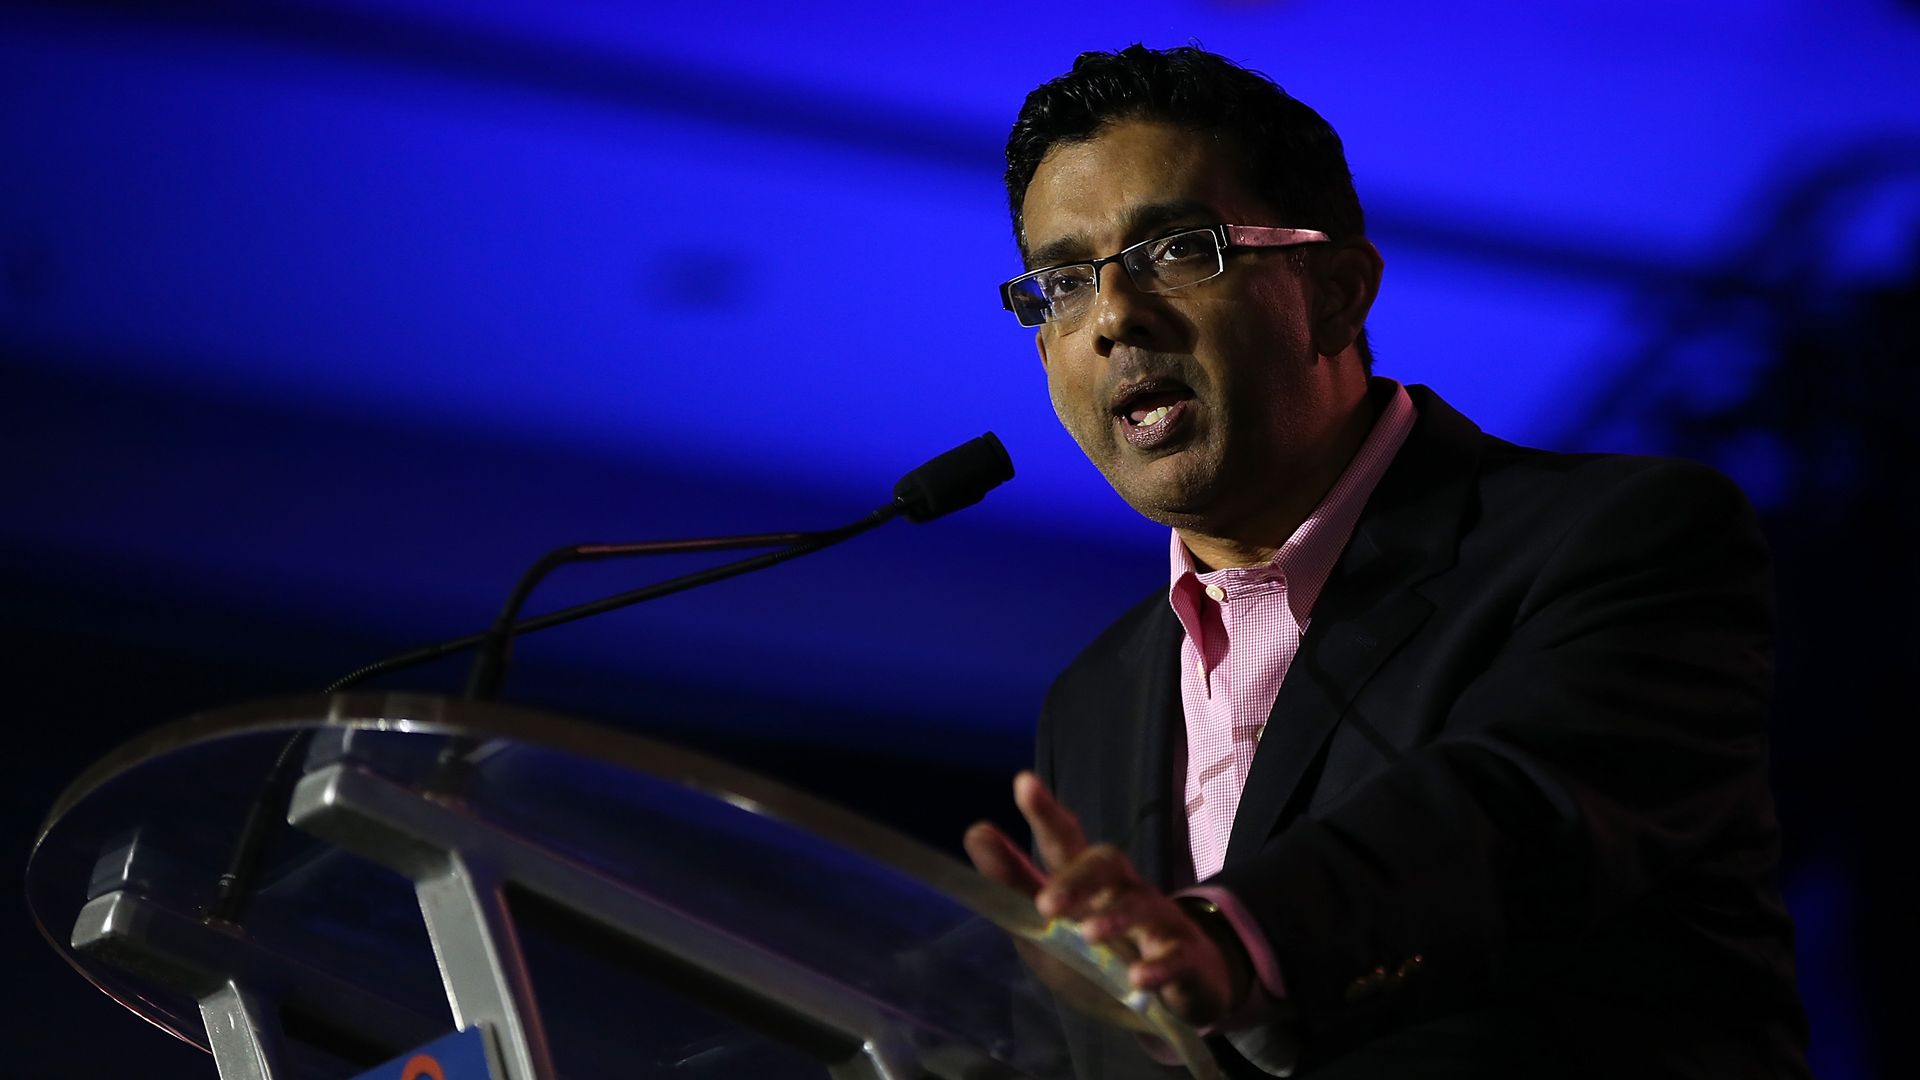 Dinesh D'Souza speaking at a podium before a blue background.